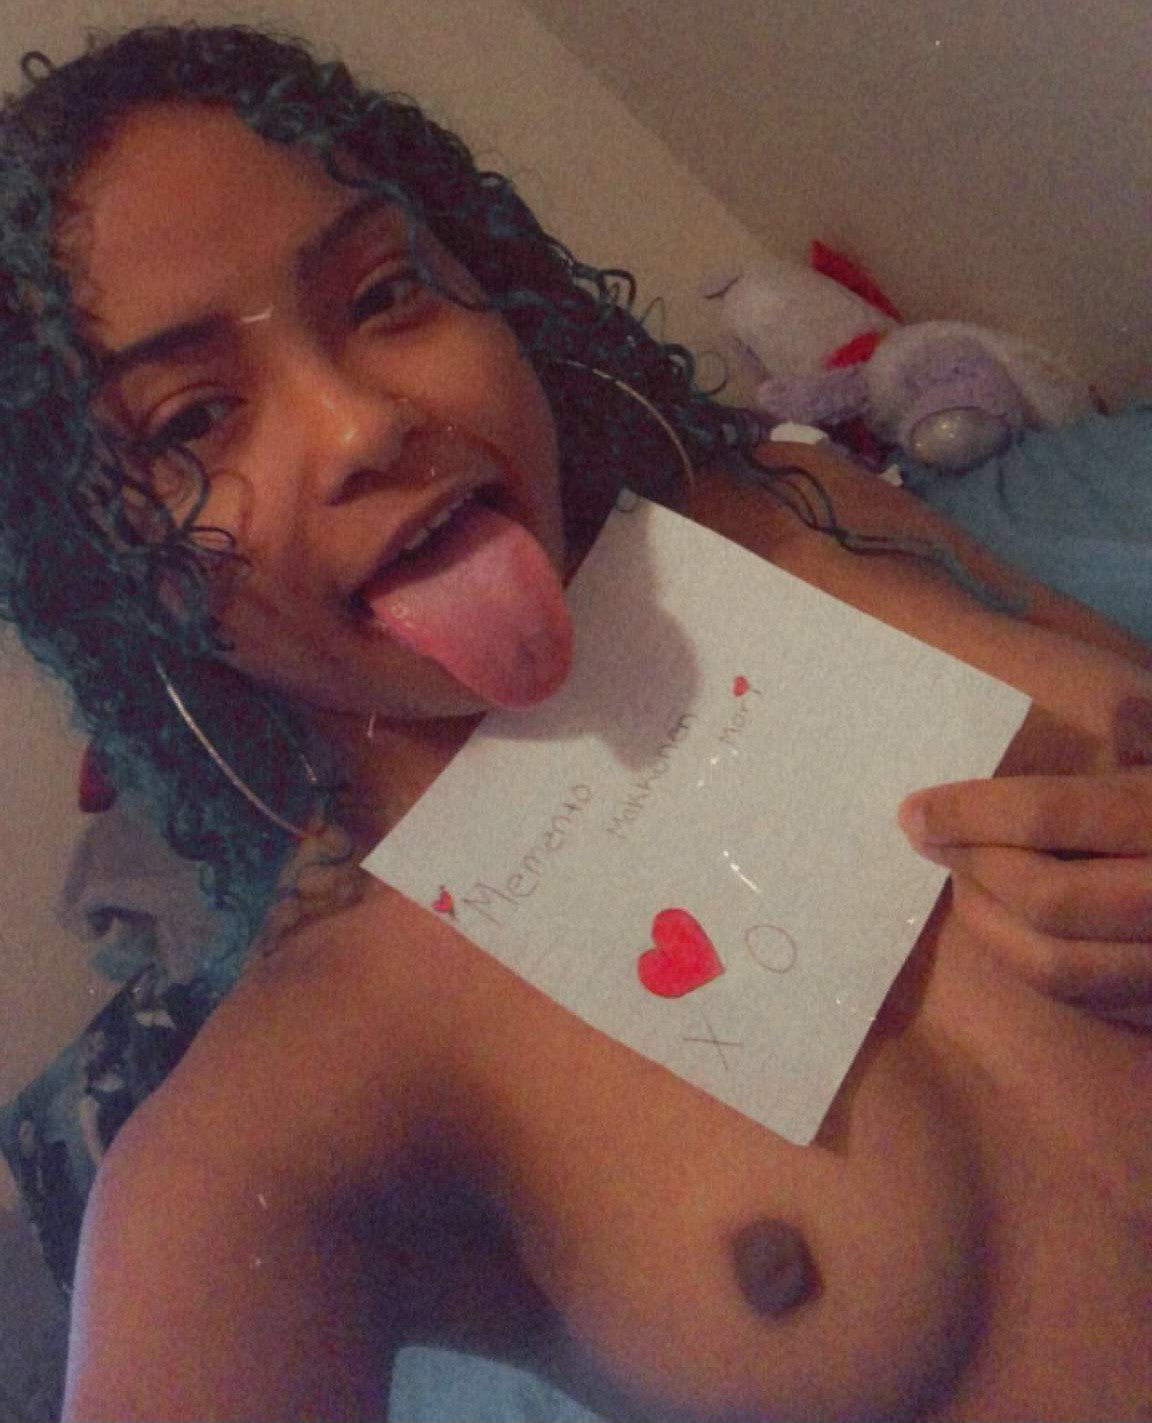 Photo by UnTouchaBallzX0 with the username @UnTouchaBallzX0, who is a verified user,  December 4, 2023 at 12:36 PM. The post is about the topic My Beautiful Fans! X❤️O and the text says '- One of my beautiful fans showing me some love. X❤️O #MyFans #Fansigns #MementoMakkonenMori #Slut #Hoe #Whore'